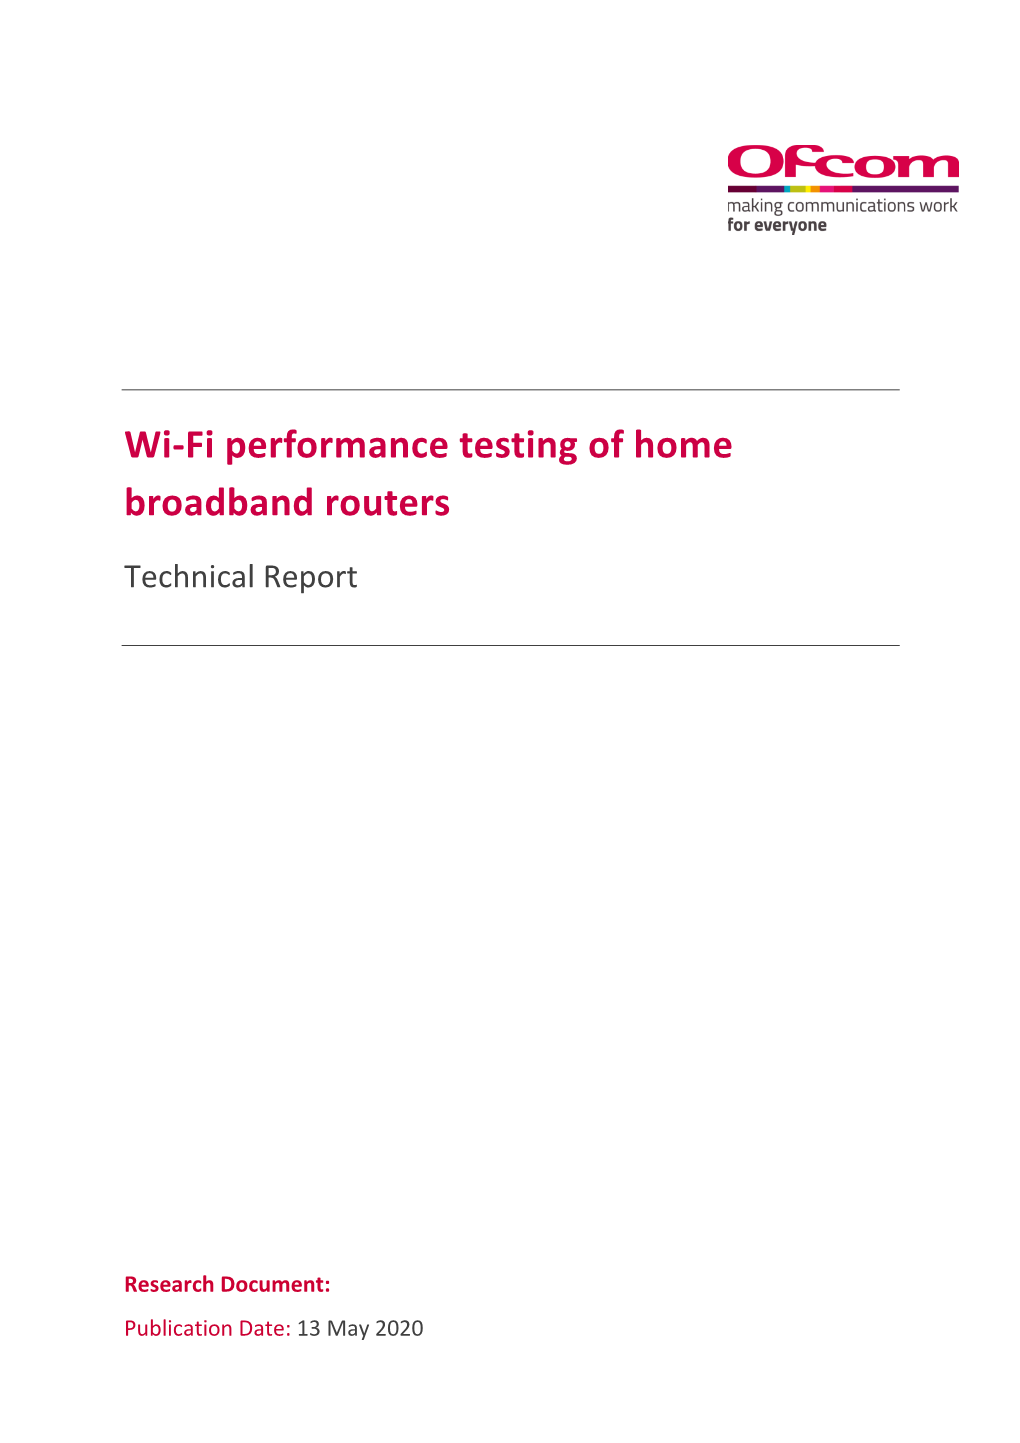 Wi-Fi Performance Testing of Home Broadband Routers